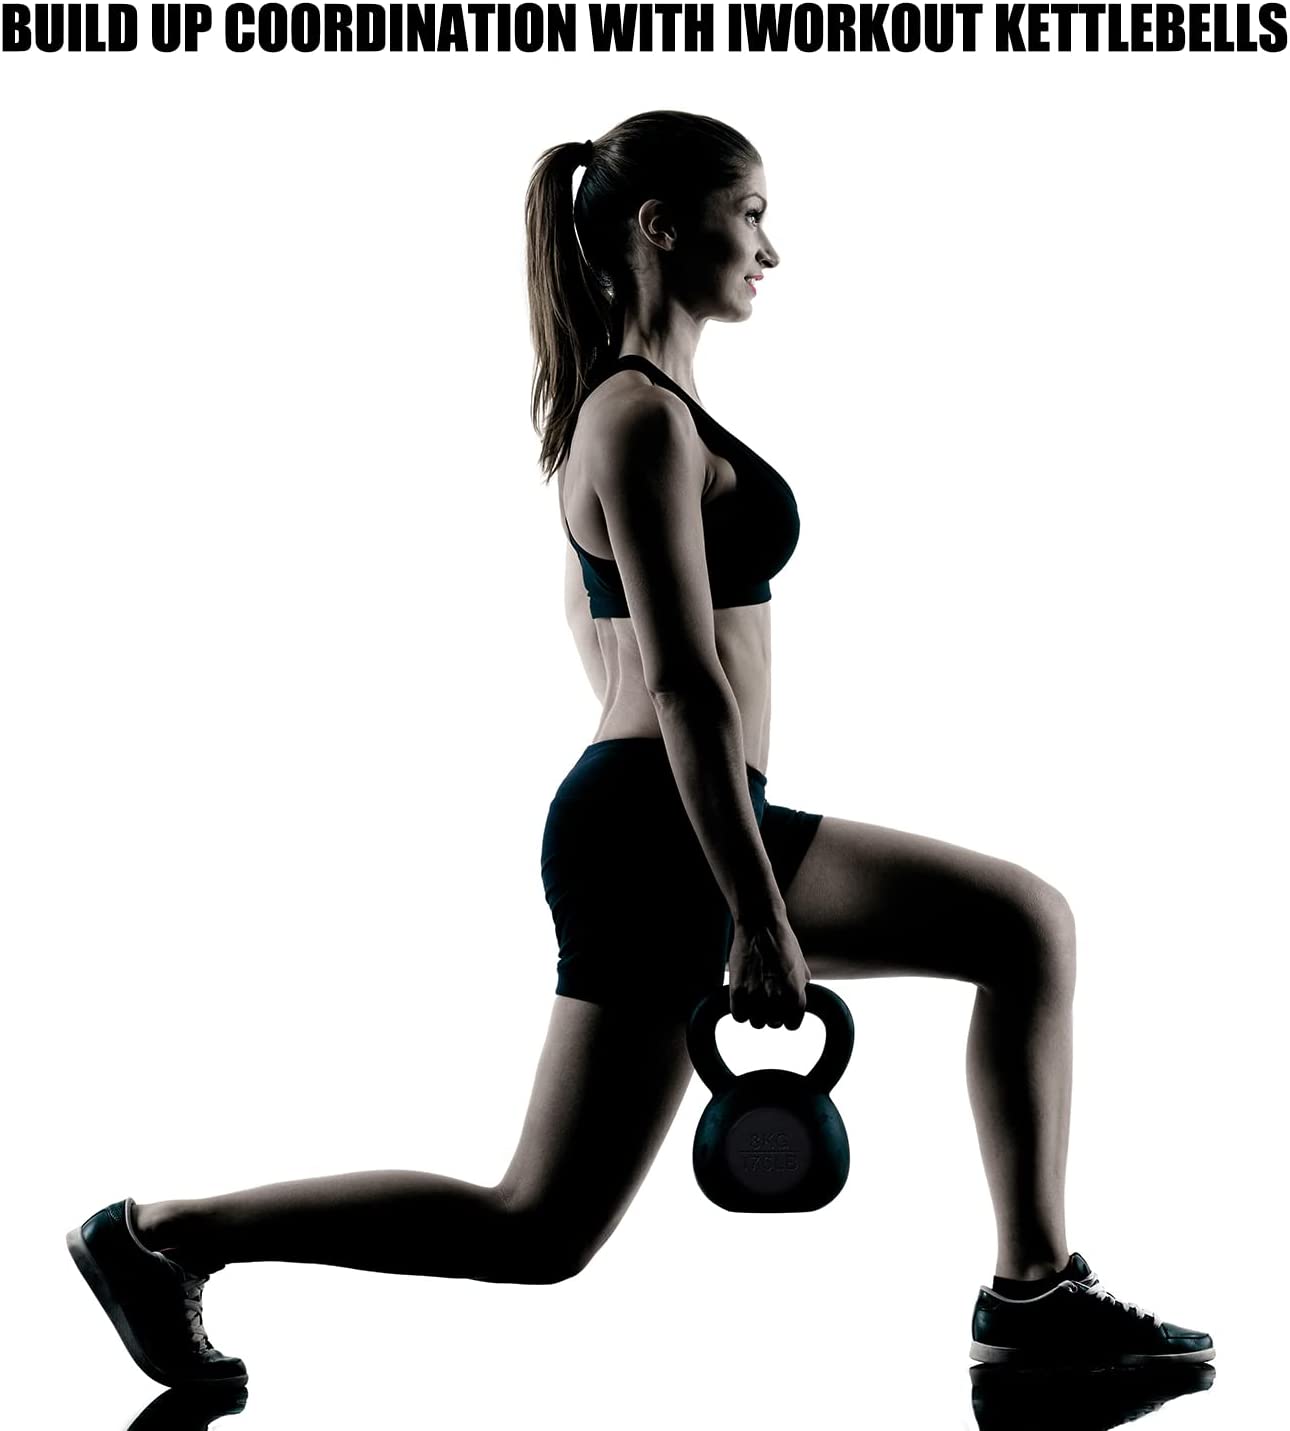 4kg to 40kg, 4kg increment Kettlebell - Weights With Rack